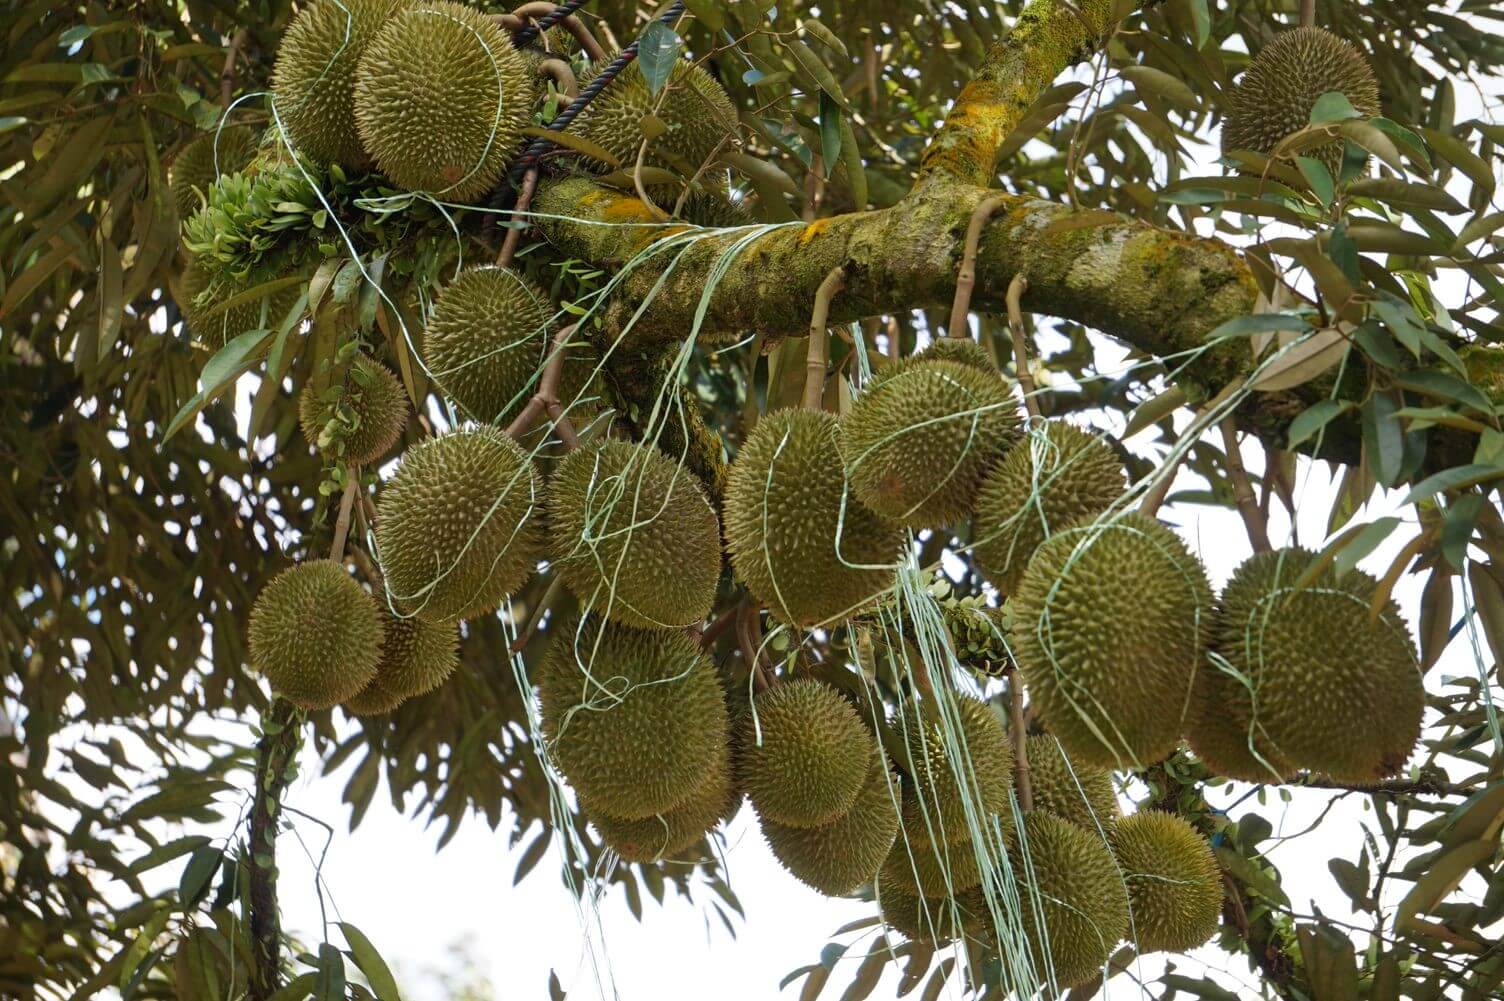 Achieve high durian yields with proper measures and INO Nature’s Fertilizer Program.